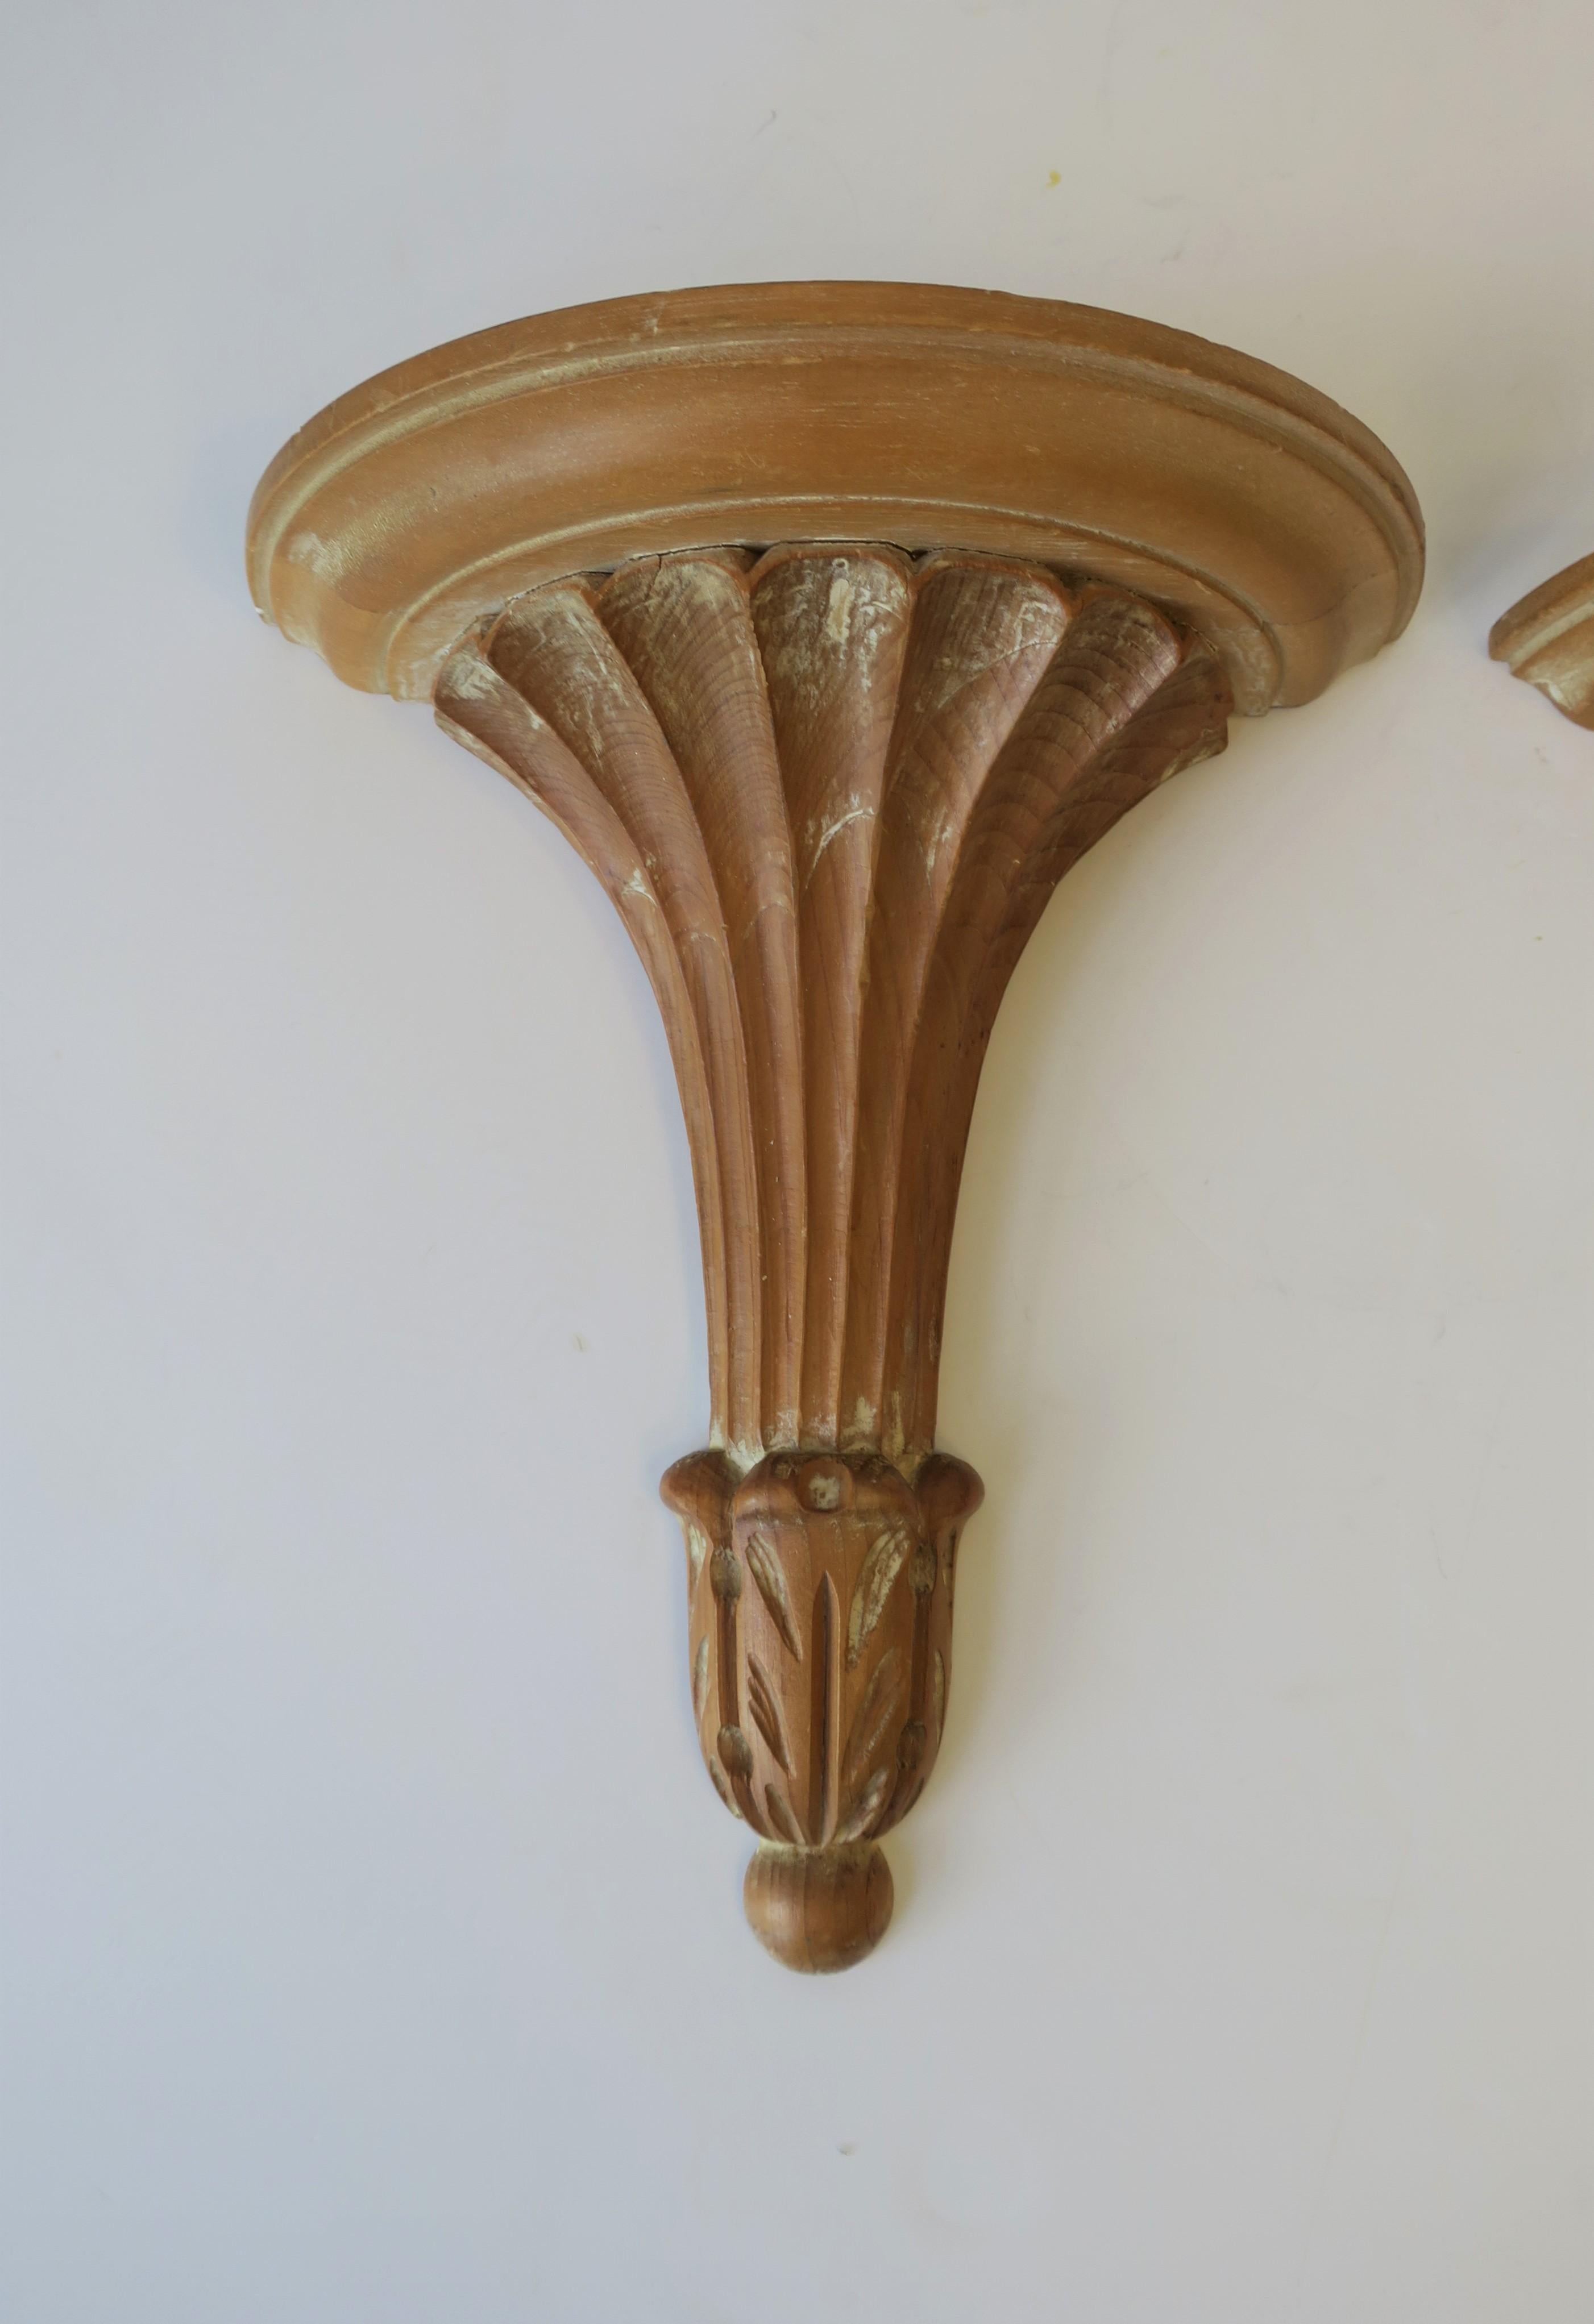 Carved Italian Wood Wall Shelves or Brackets, Pair